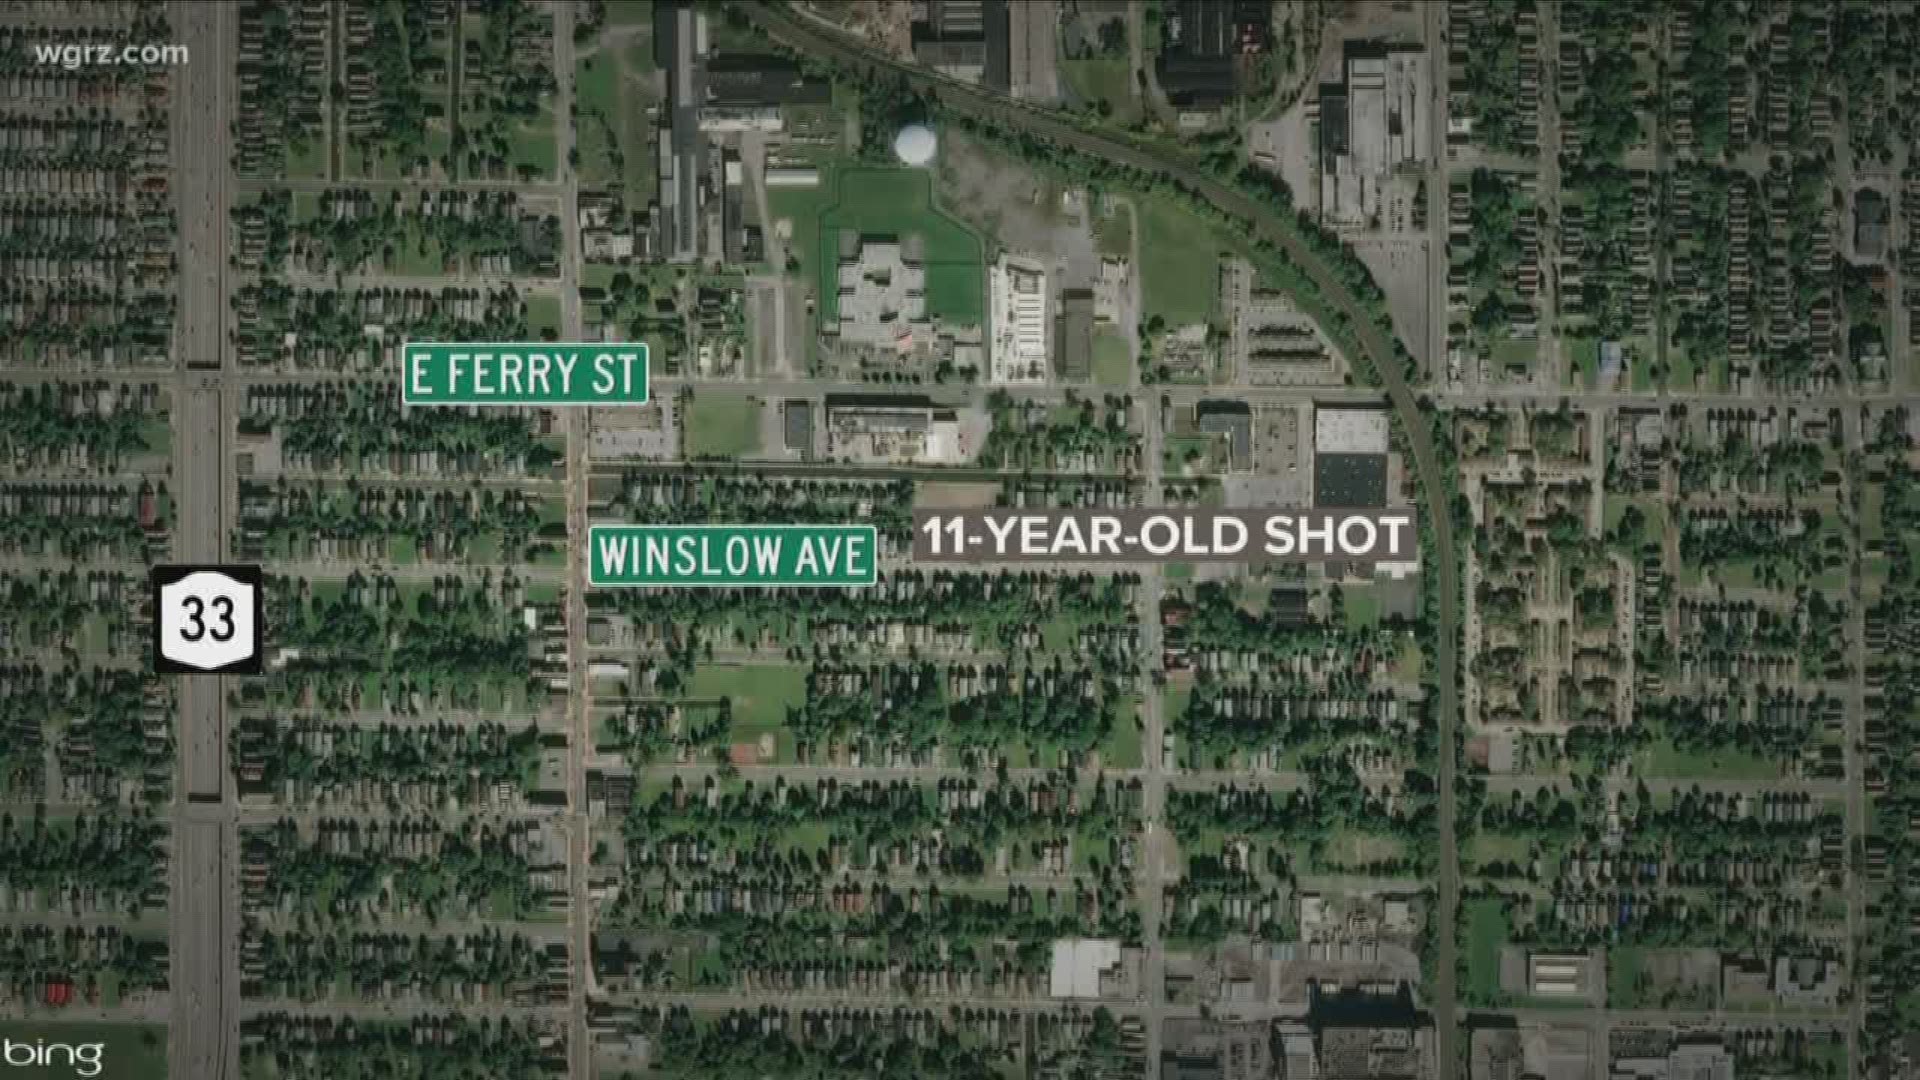 the girl was stable in the hospital after someone shot her in the leg on Winslow Avenue around midnight.